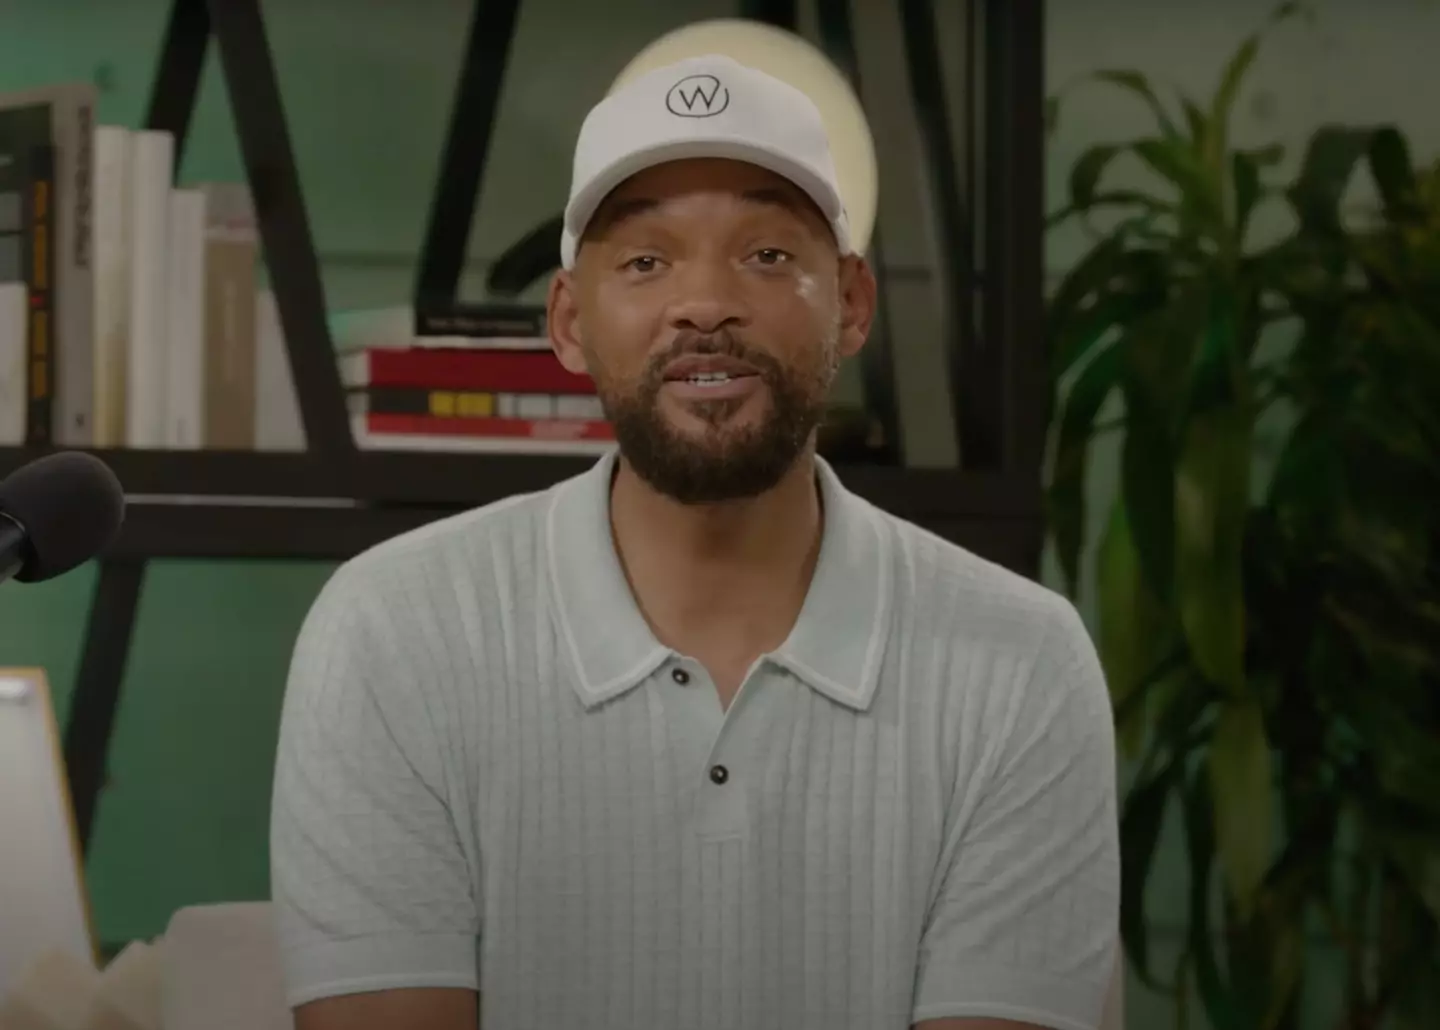 Will Smith shared a video apology for slapping Chris Rock.